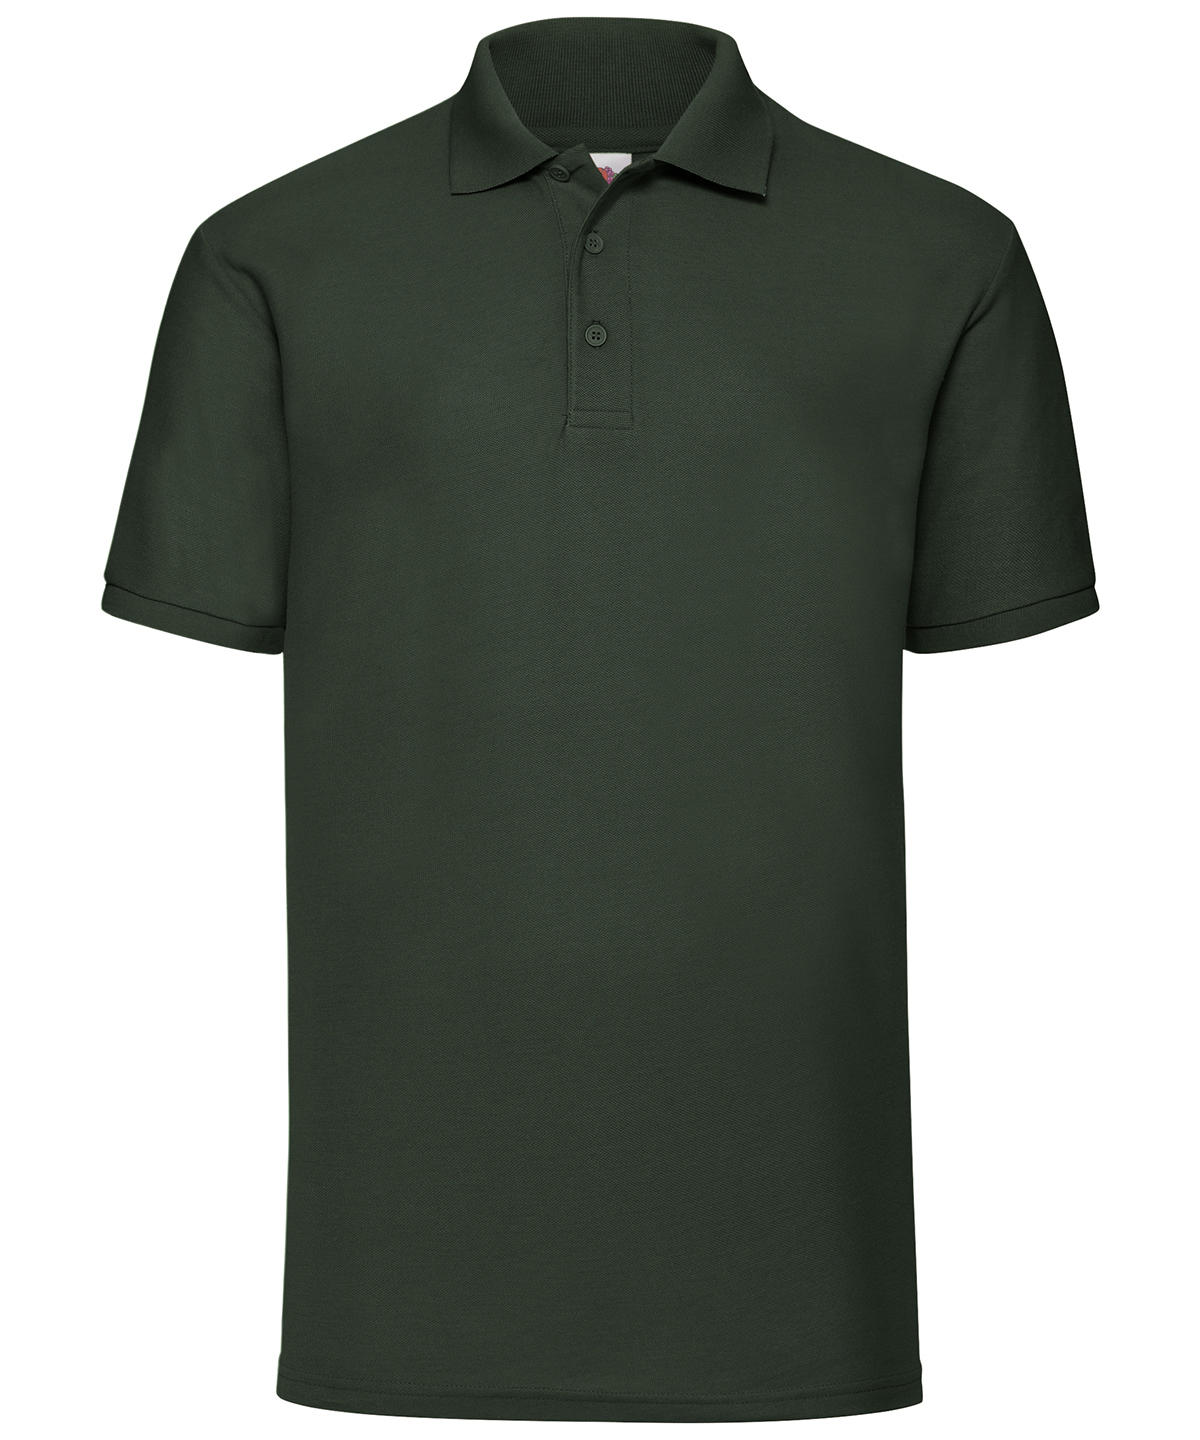 14th Hove CUBS - Bottle Green Polo Shirt with Logo - The Dropped Stitch